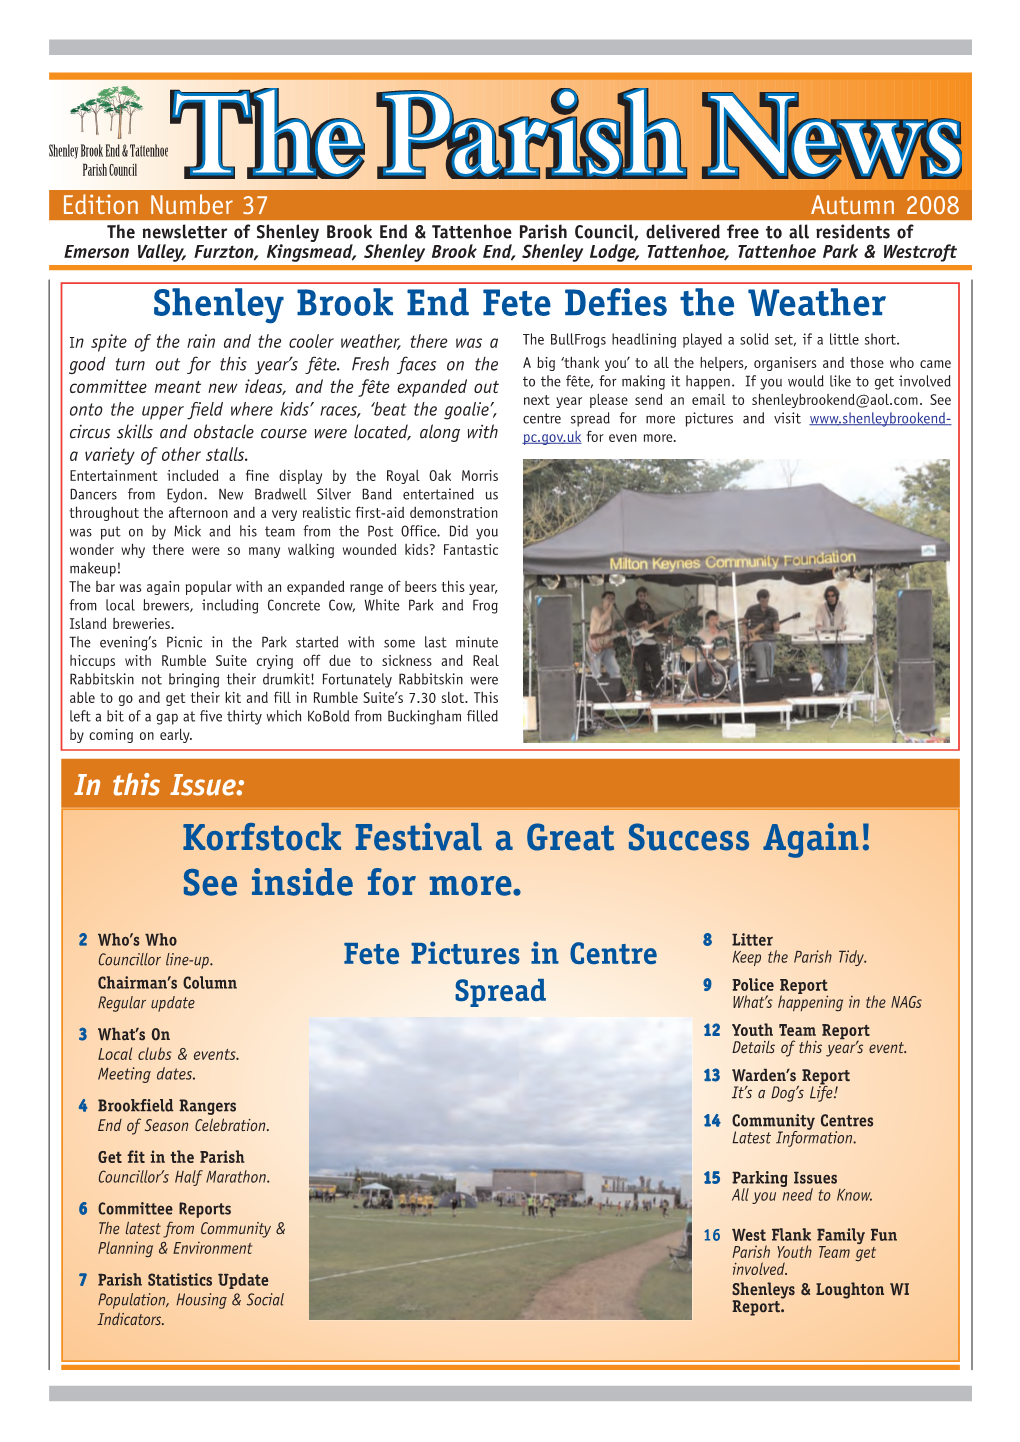 Shenley Brook End Fete Defies the Weather Korfstock Festival a Great